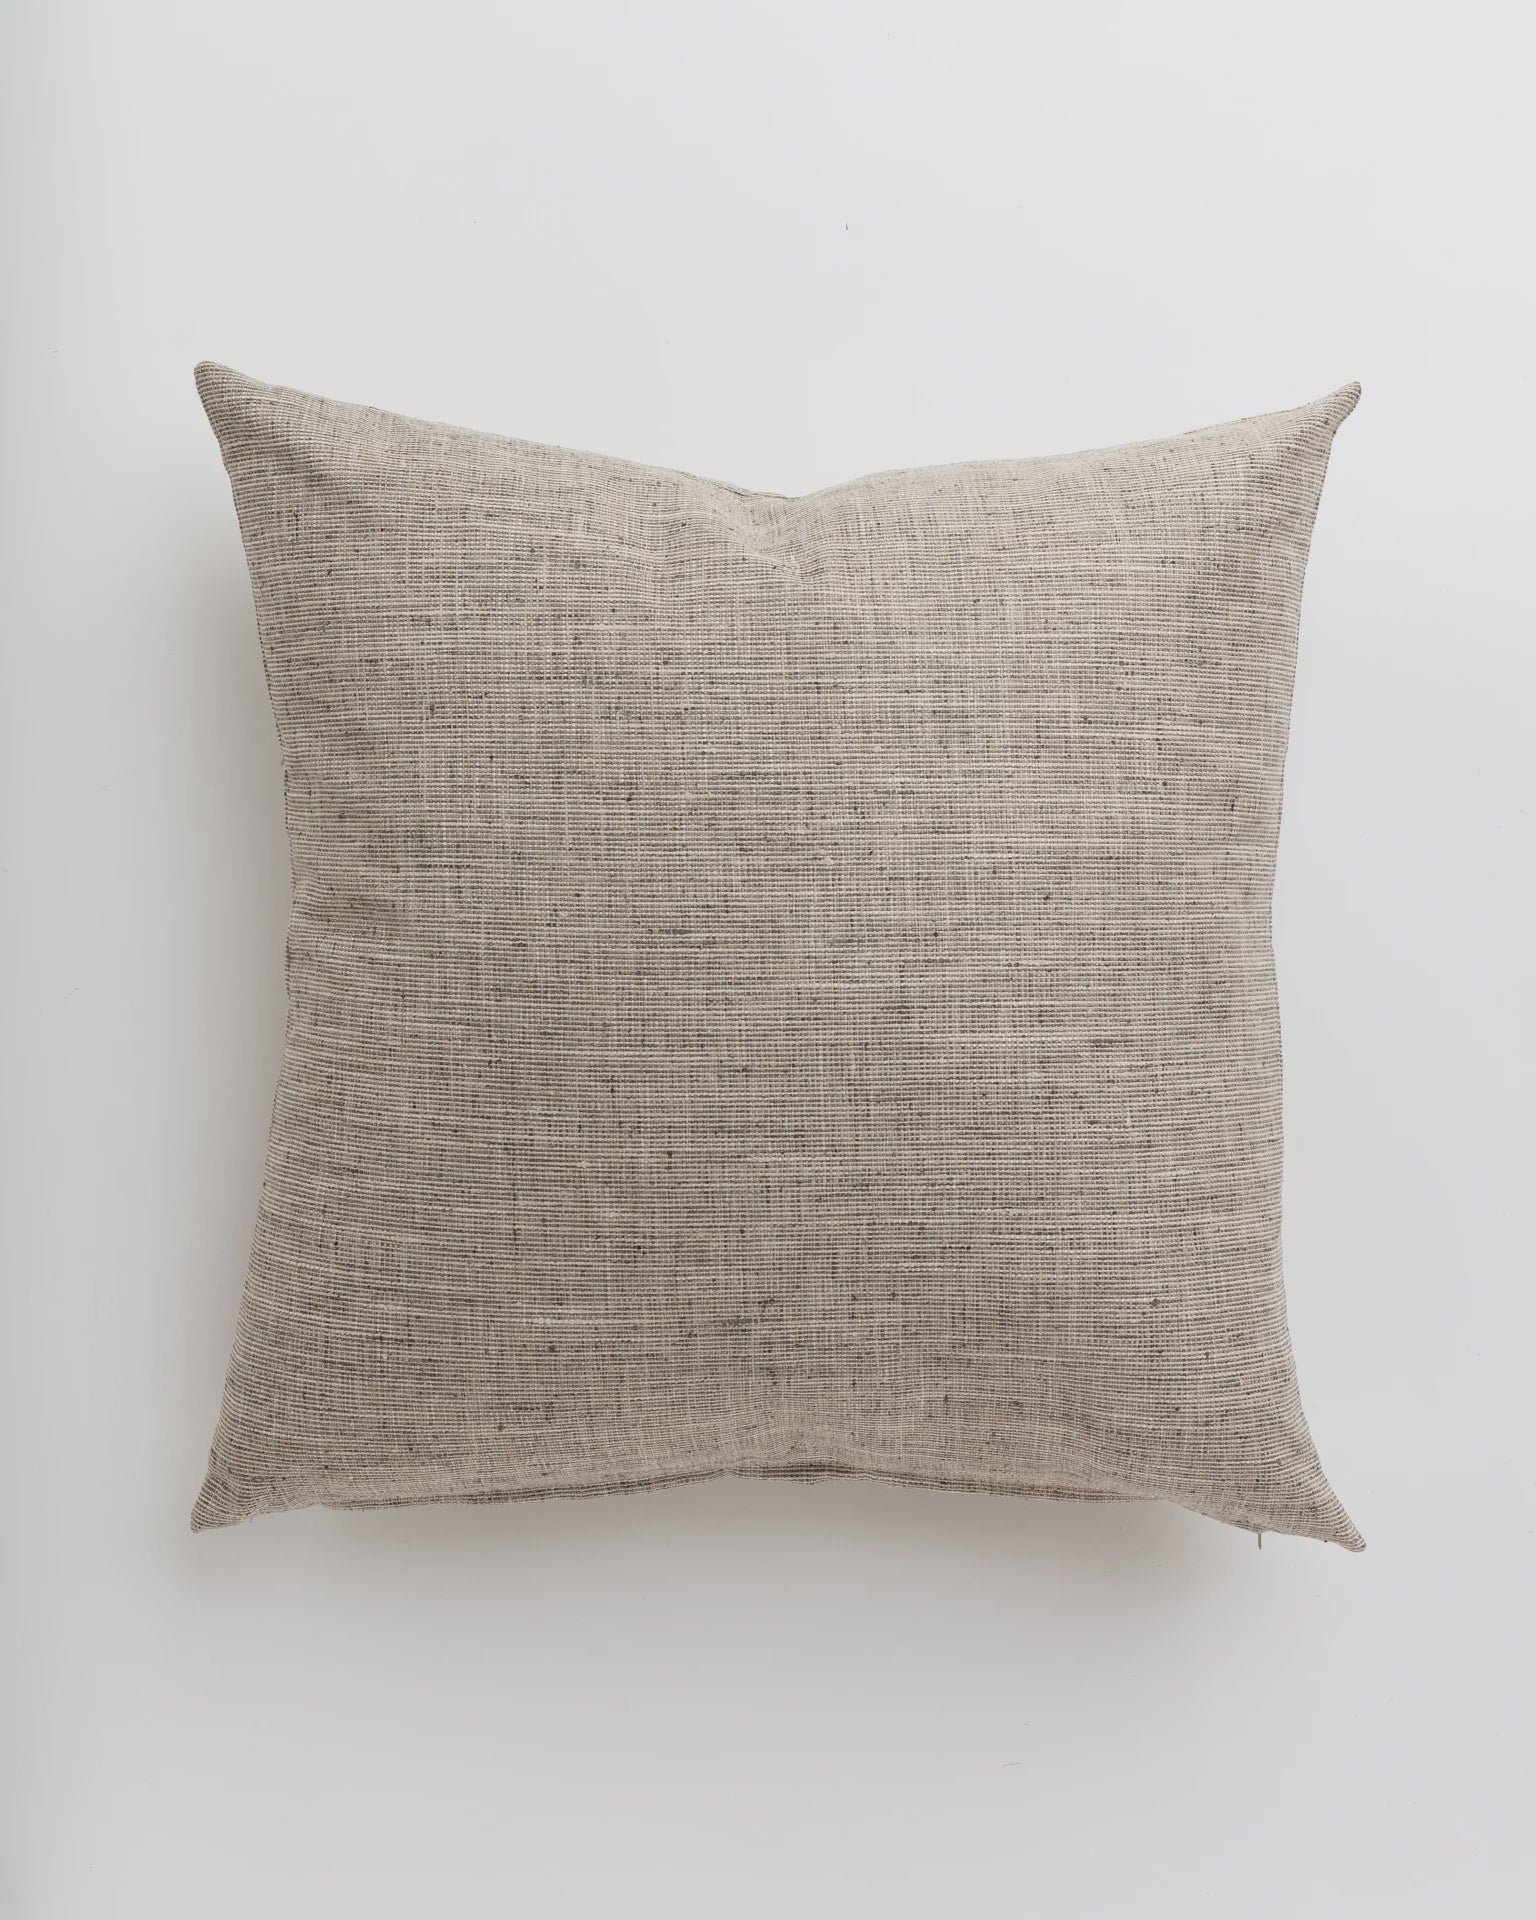 A plain, square-shaped Grasscloth Steel Pillow 26x26 displayed against a white background in a Scottsdale Arizona bungalow by Gabby.